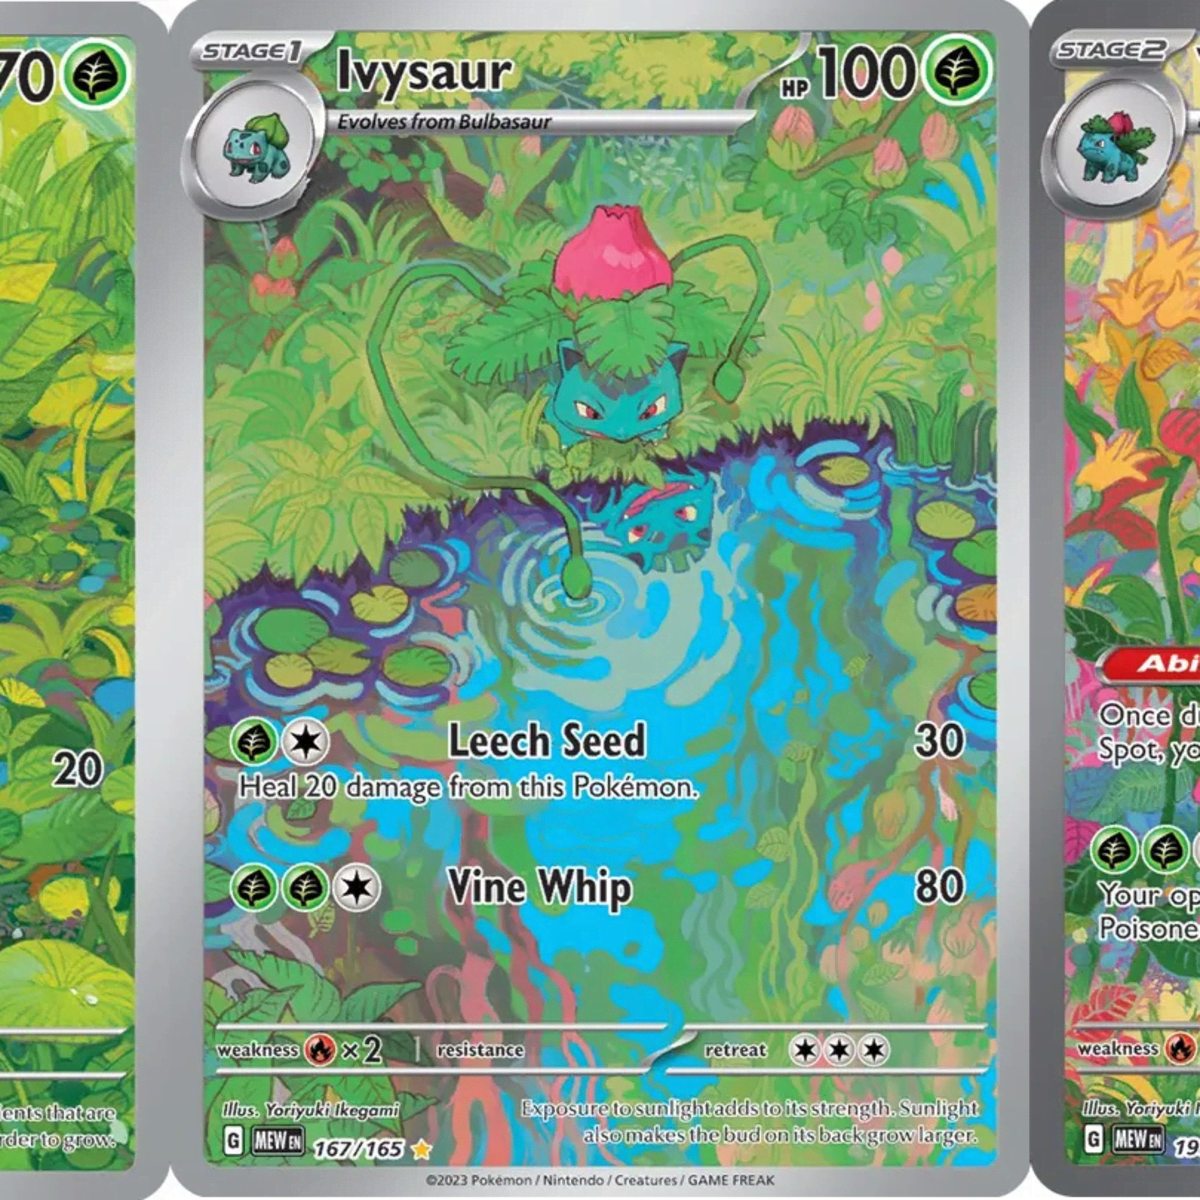 Pokemon Cards Silver Border: Why is the Yellow Border Gone